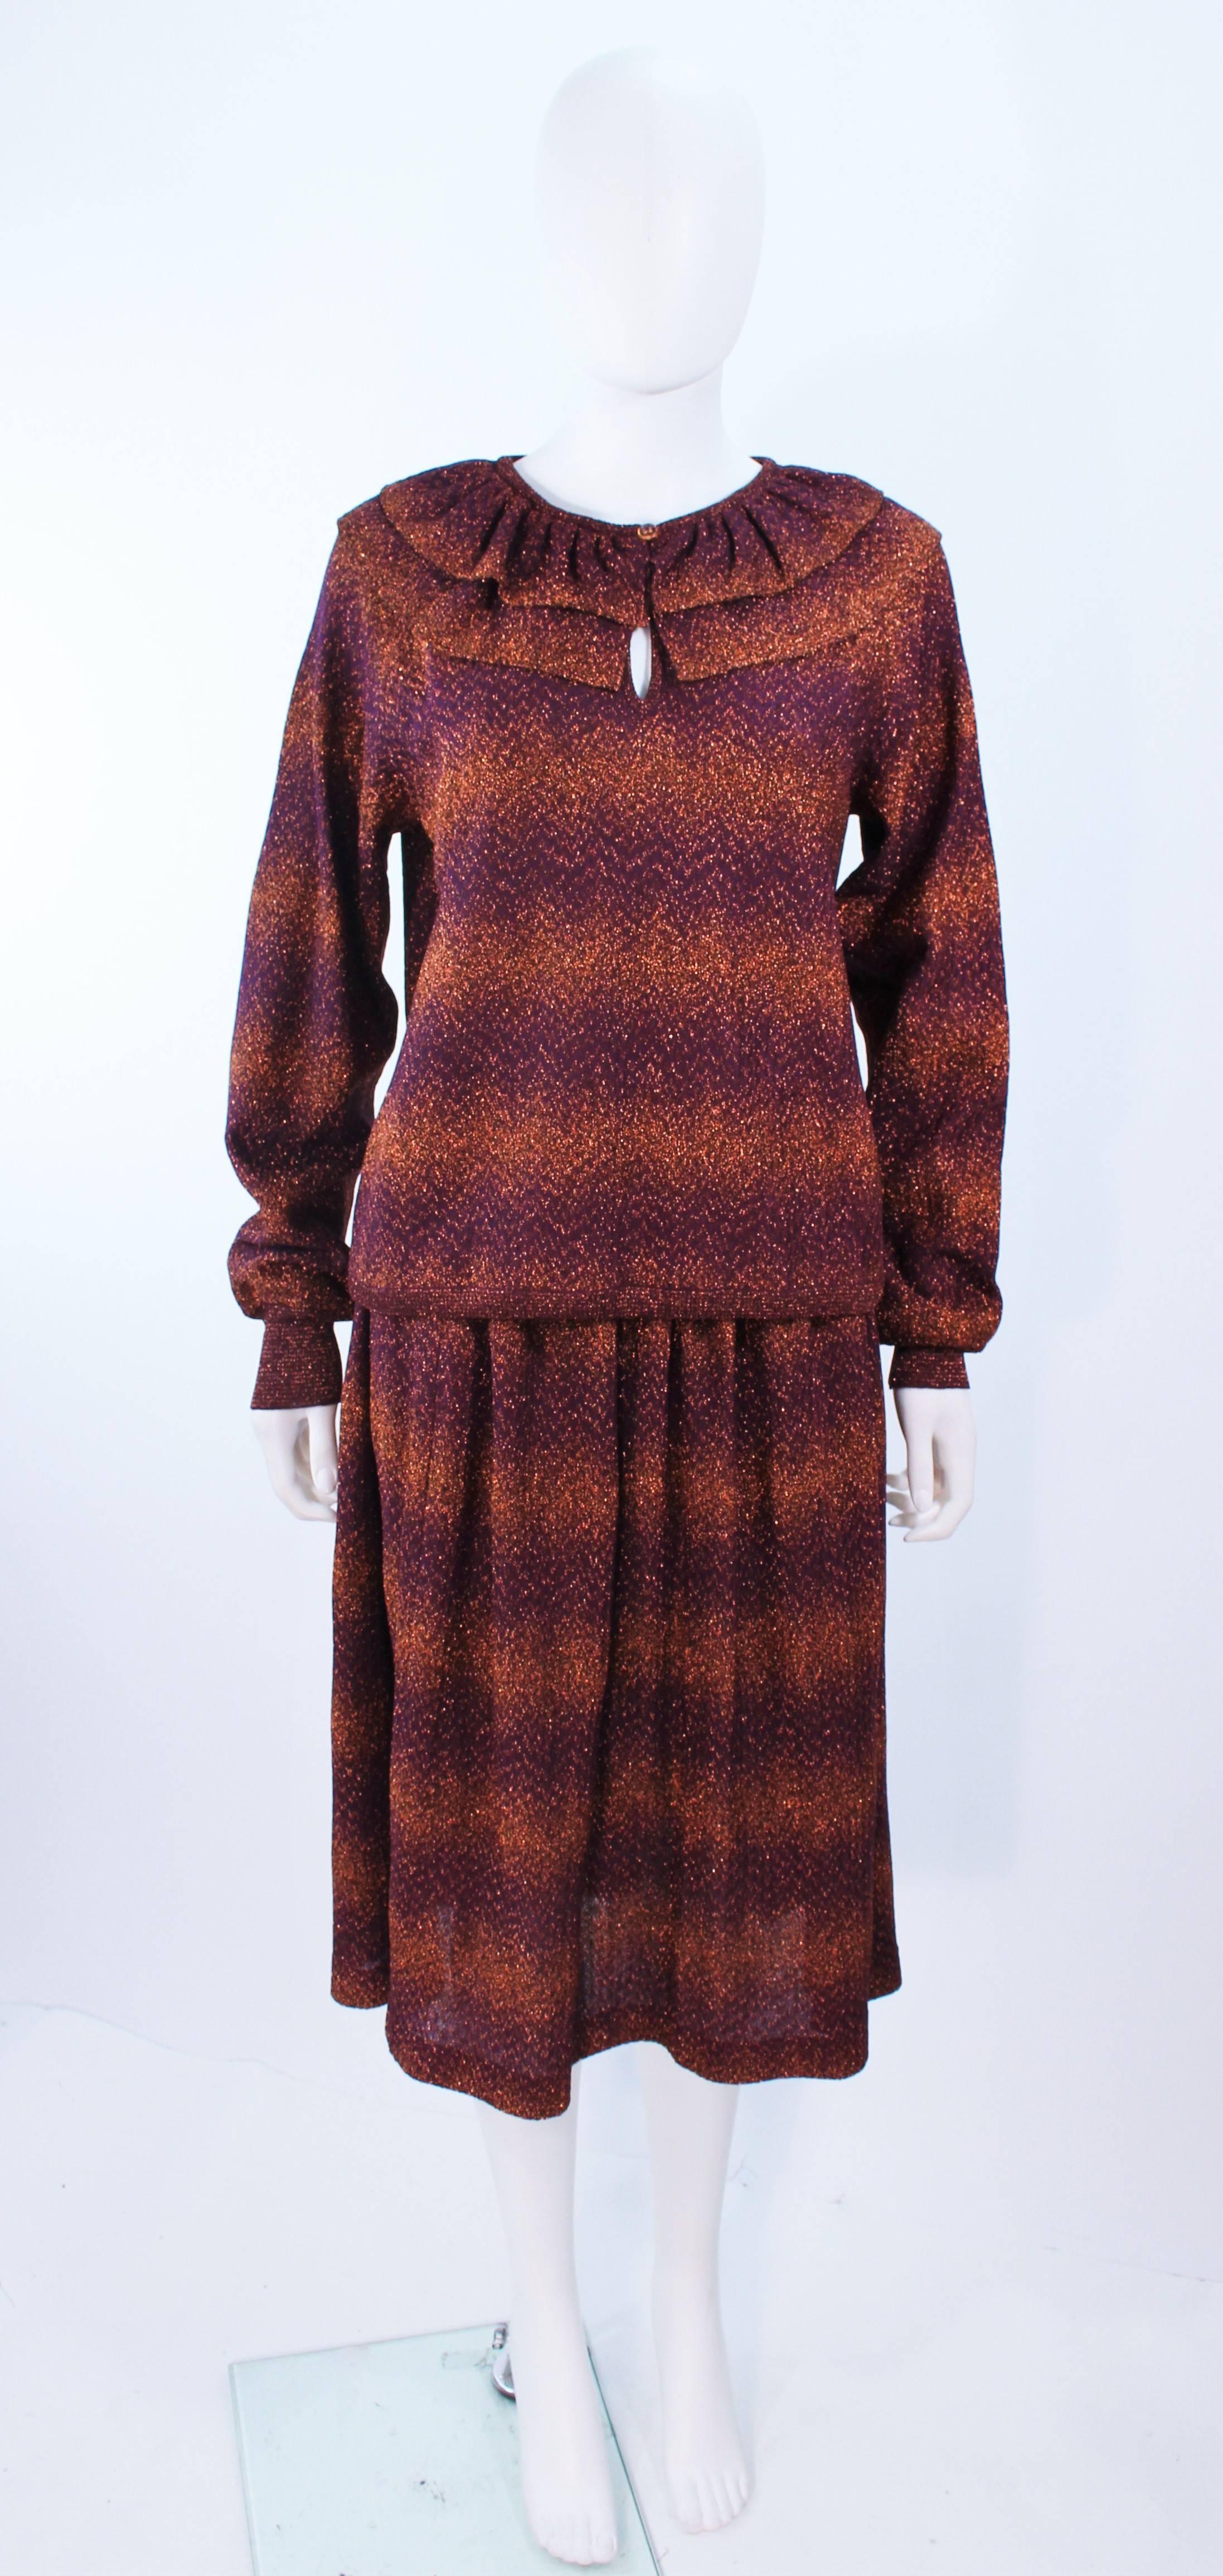 This Missoni design is composed of a a metallic knit in purple and bronze. The top features a ruffled collar with a center front button. The skirt has a classic flare design. In excellent vintage condition.

**Please cross-reference measurements